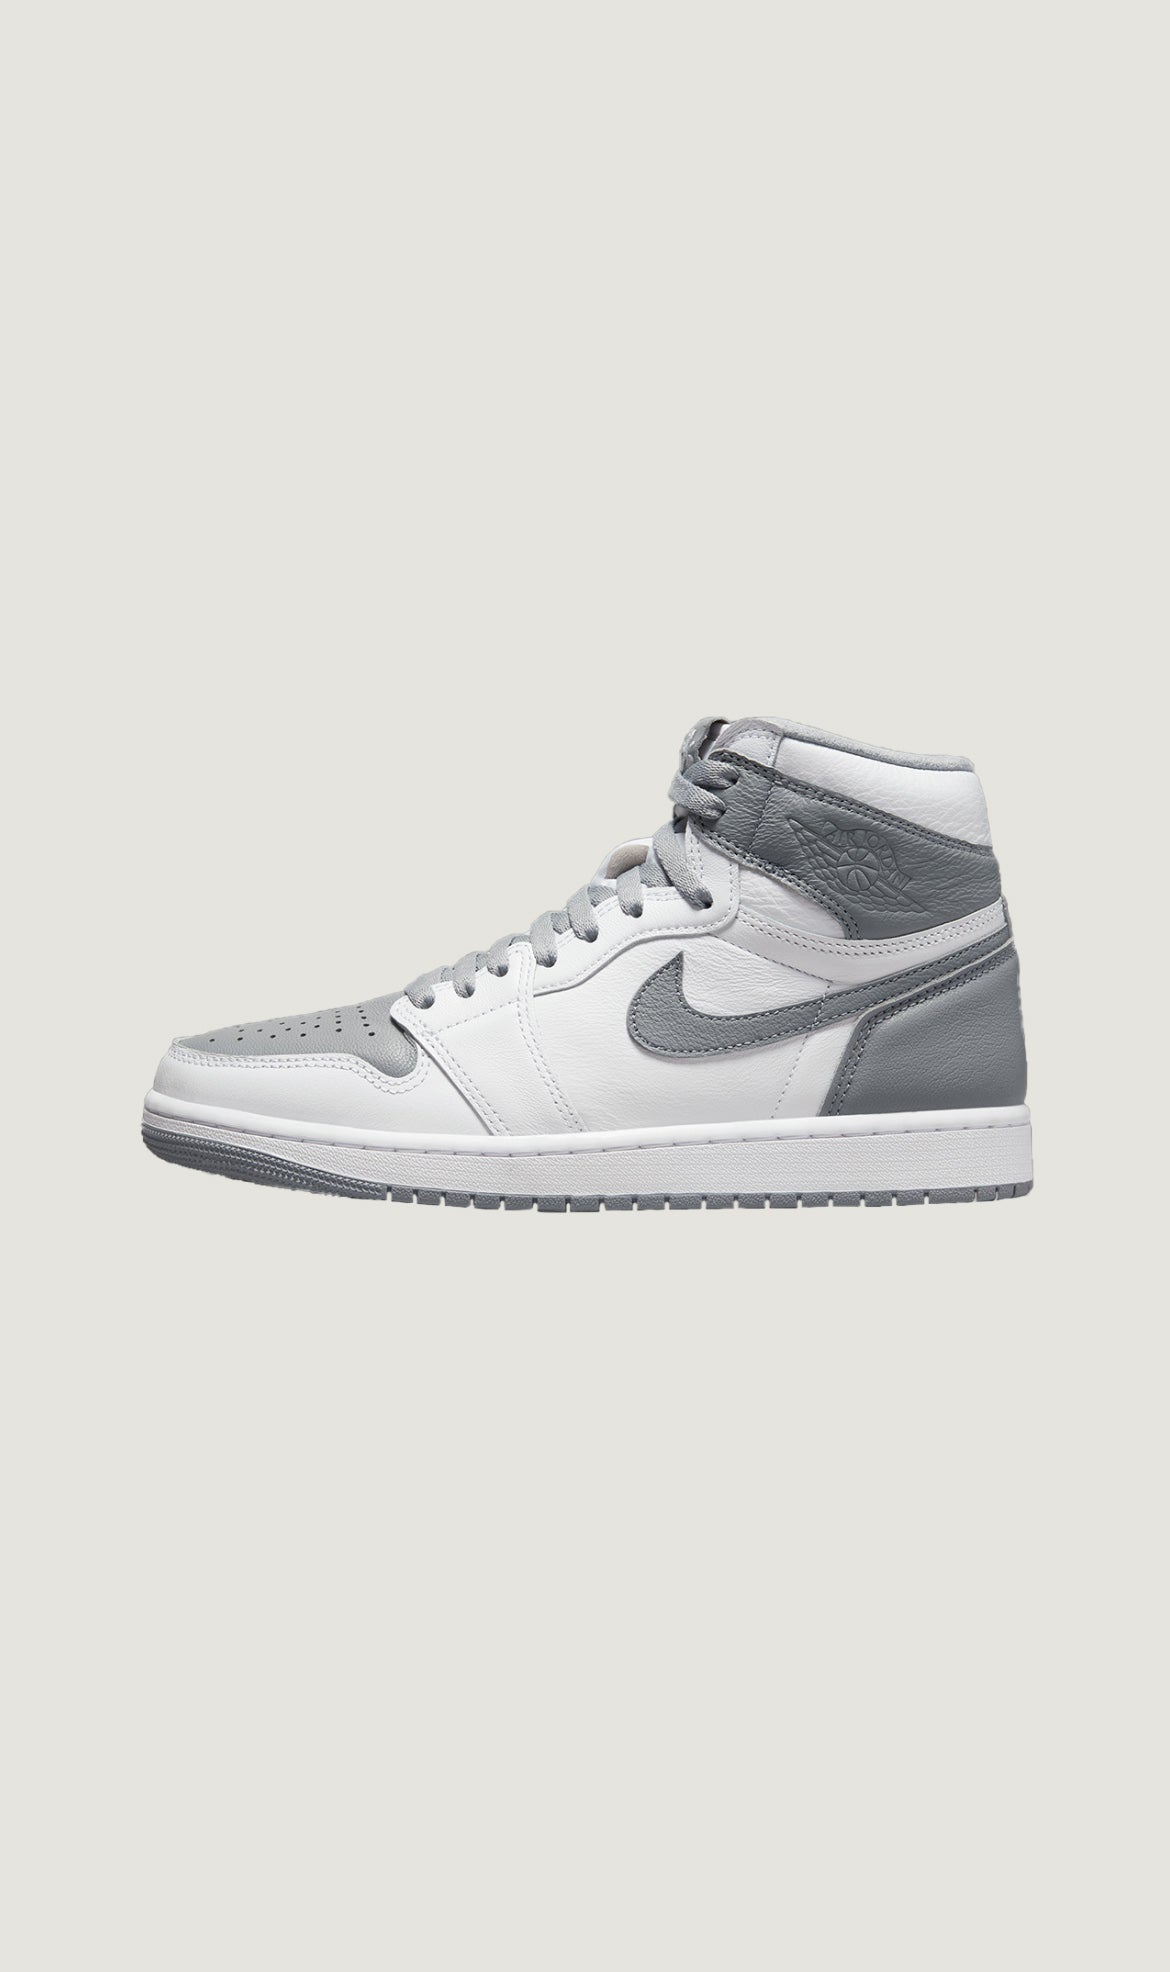 Load image into Gallery viewer, AIR JORDAN 1 RETRO HIGH OG - STEALTH
